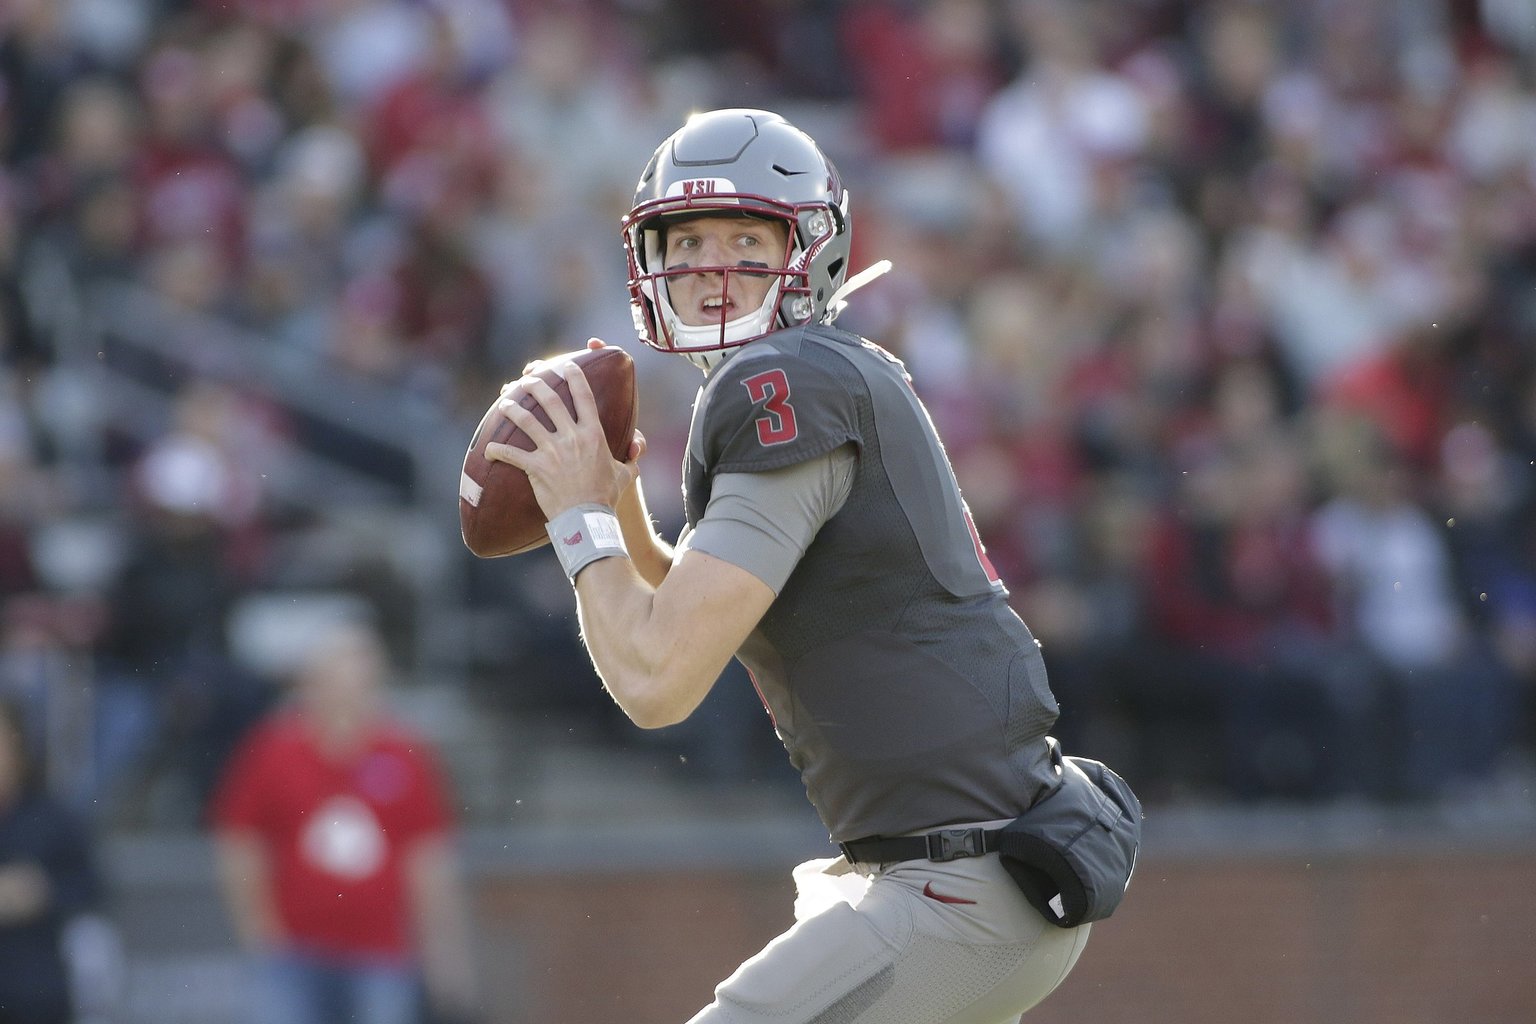 Armour: Washington State QB Committed Suicide but Football Killed Him